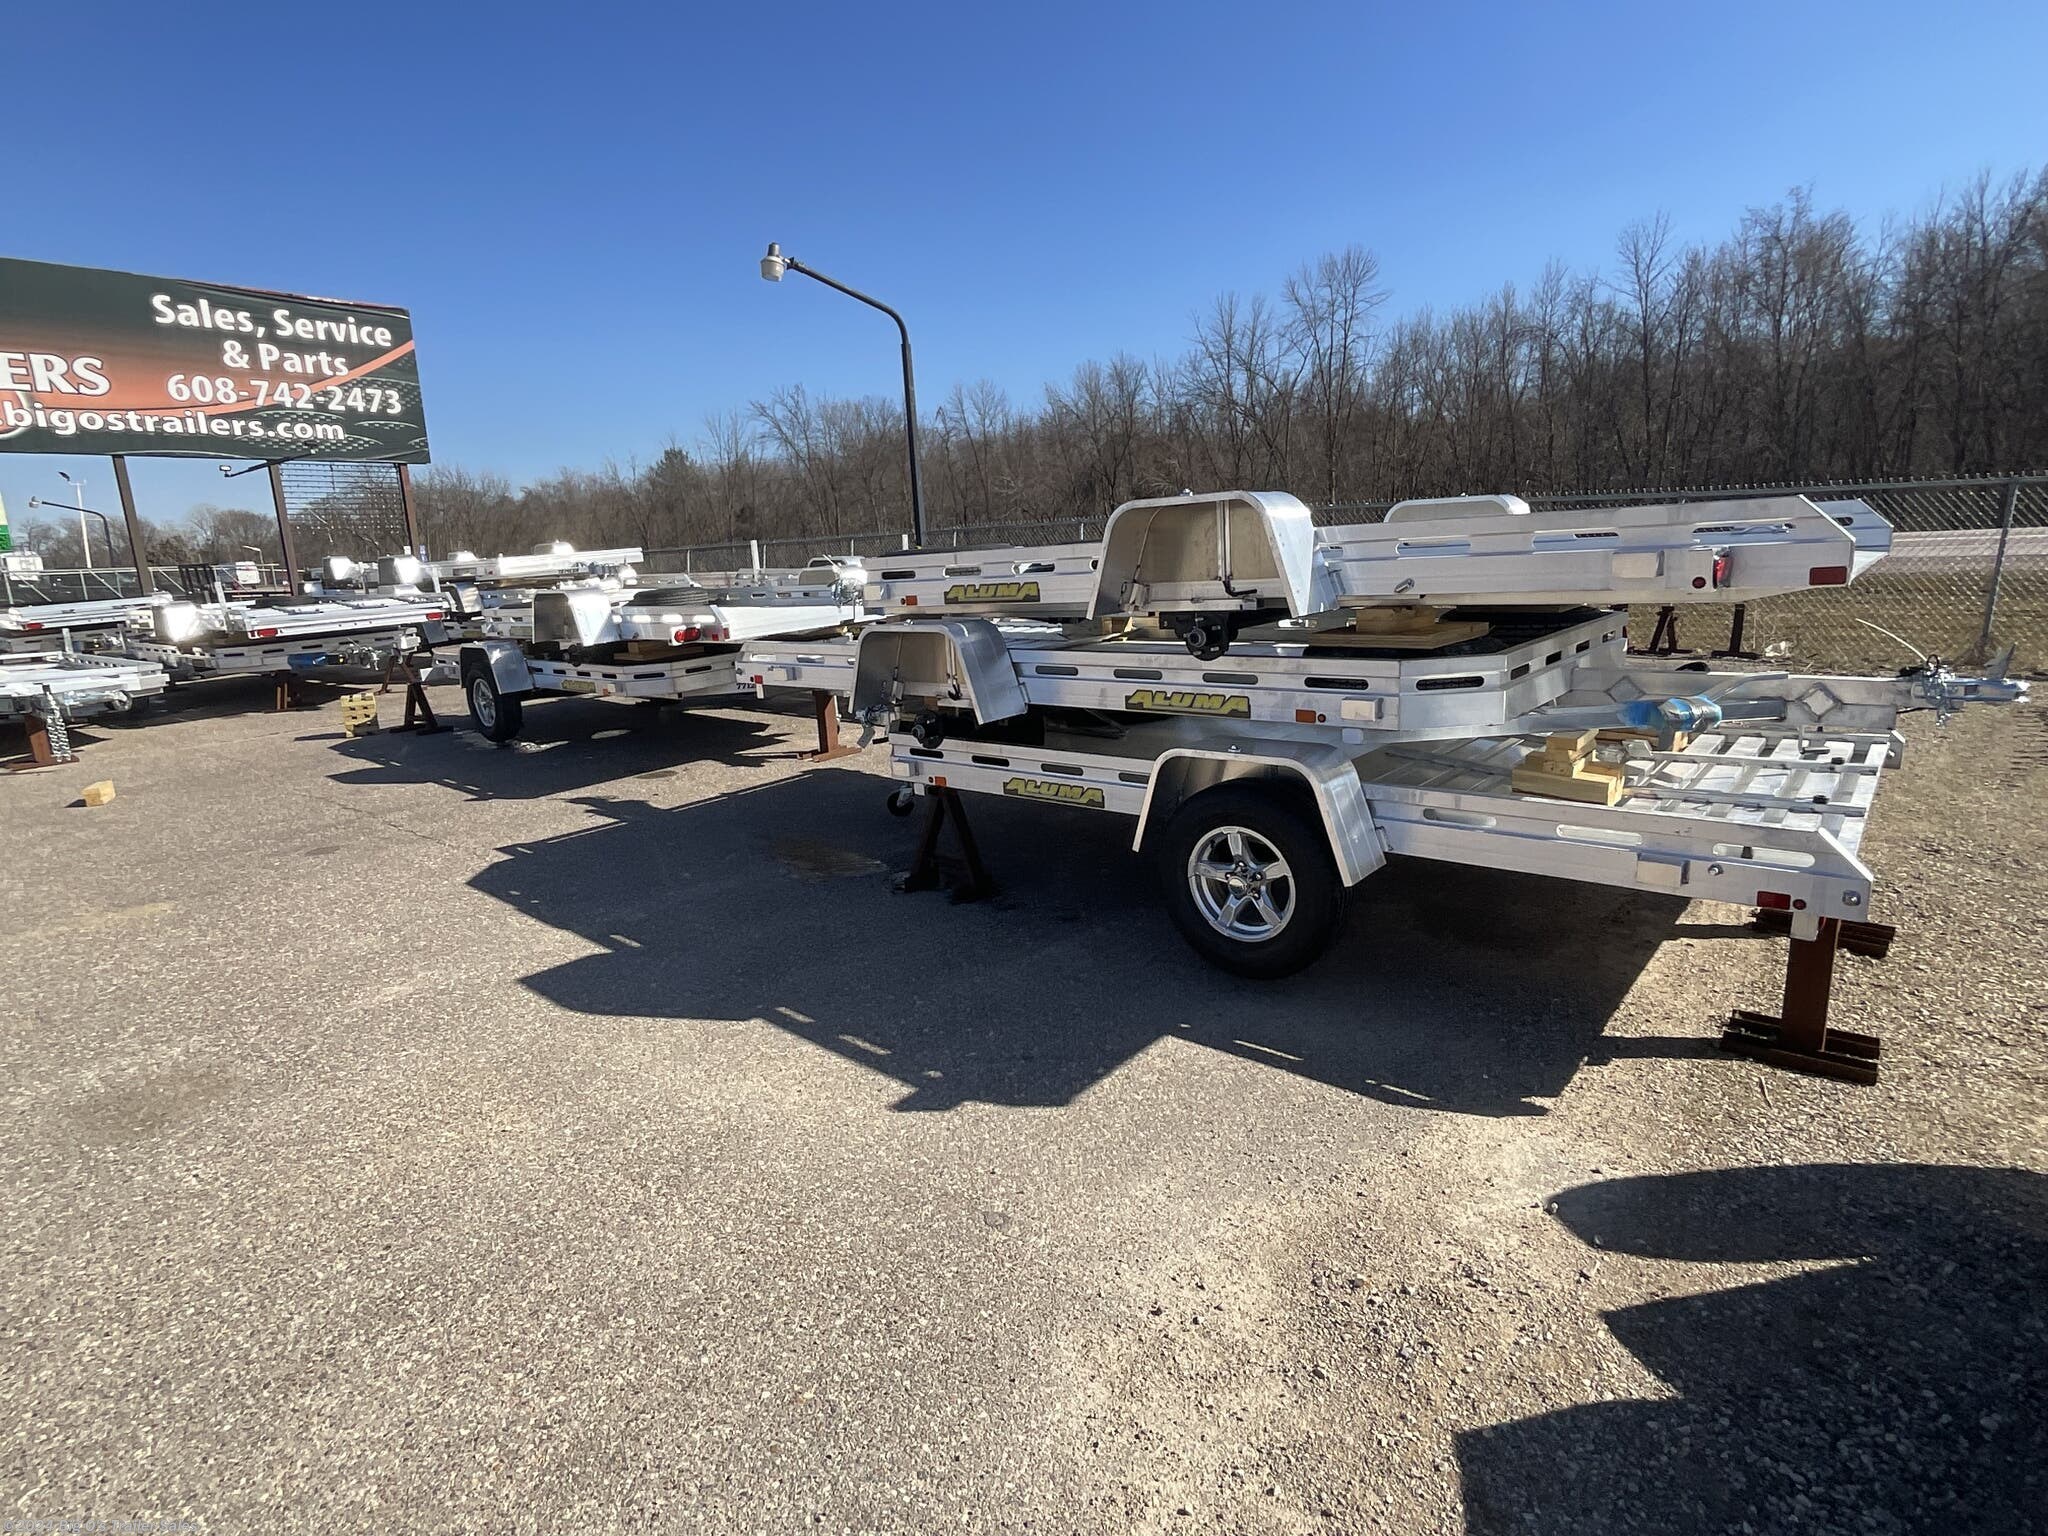 WE SELL LOADS AND LOADS AND TRAILERS. BE SURE TO STOP IN AND GET YOUR BEST DEAL ON IN STOCK INVENTORY.